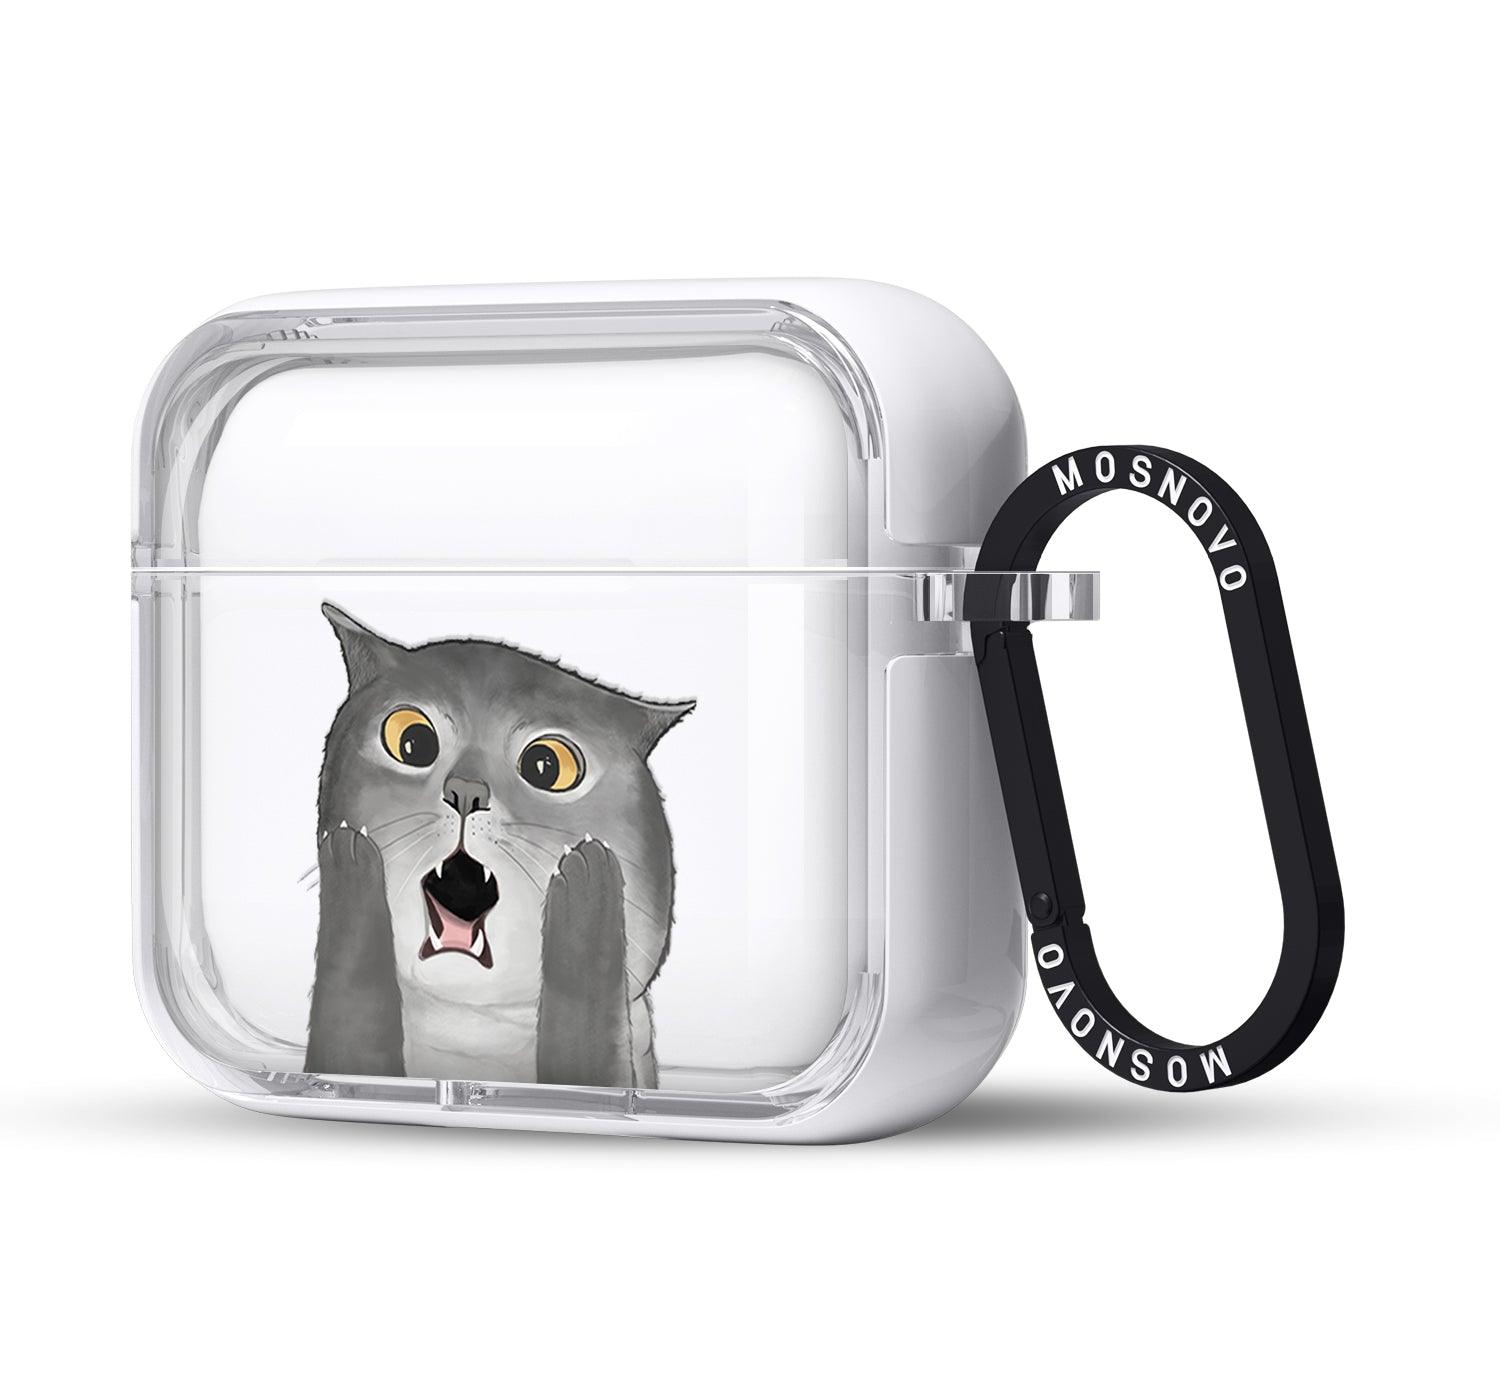 OMG Cat AirPods 3 Case (3rd Generation) - MOSNOVO